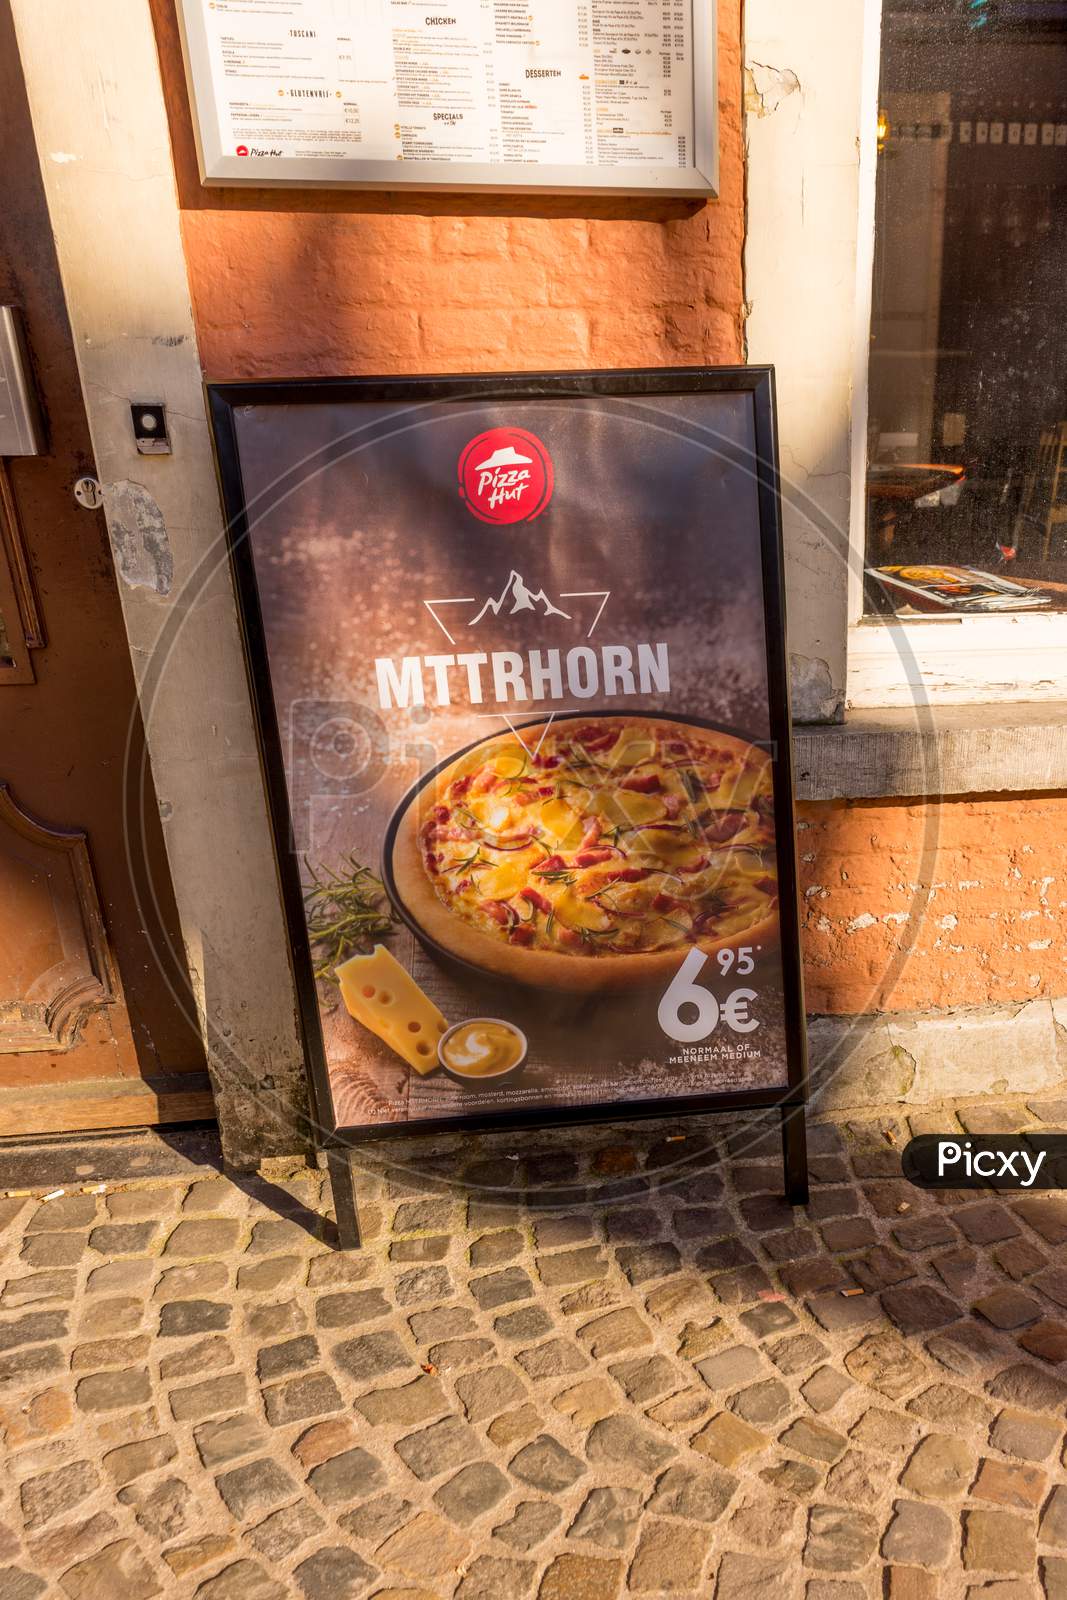 Bruges, Belgium - 17 February 2018: The Matterhorn Pizza Being Sold At Pizza Hut In Bruges, Belgium